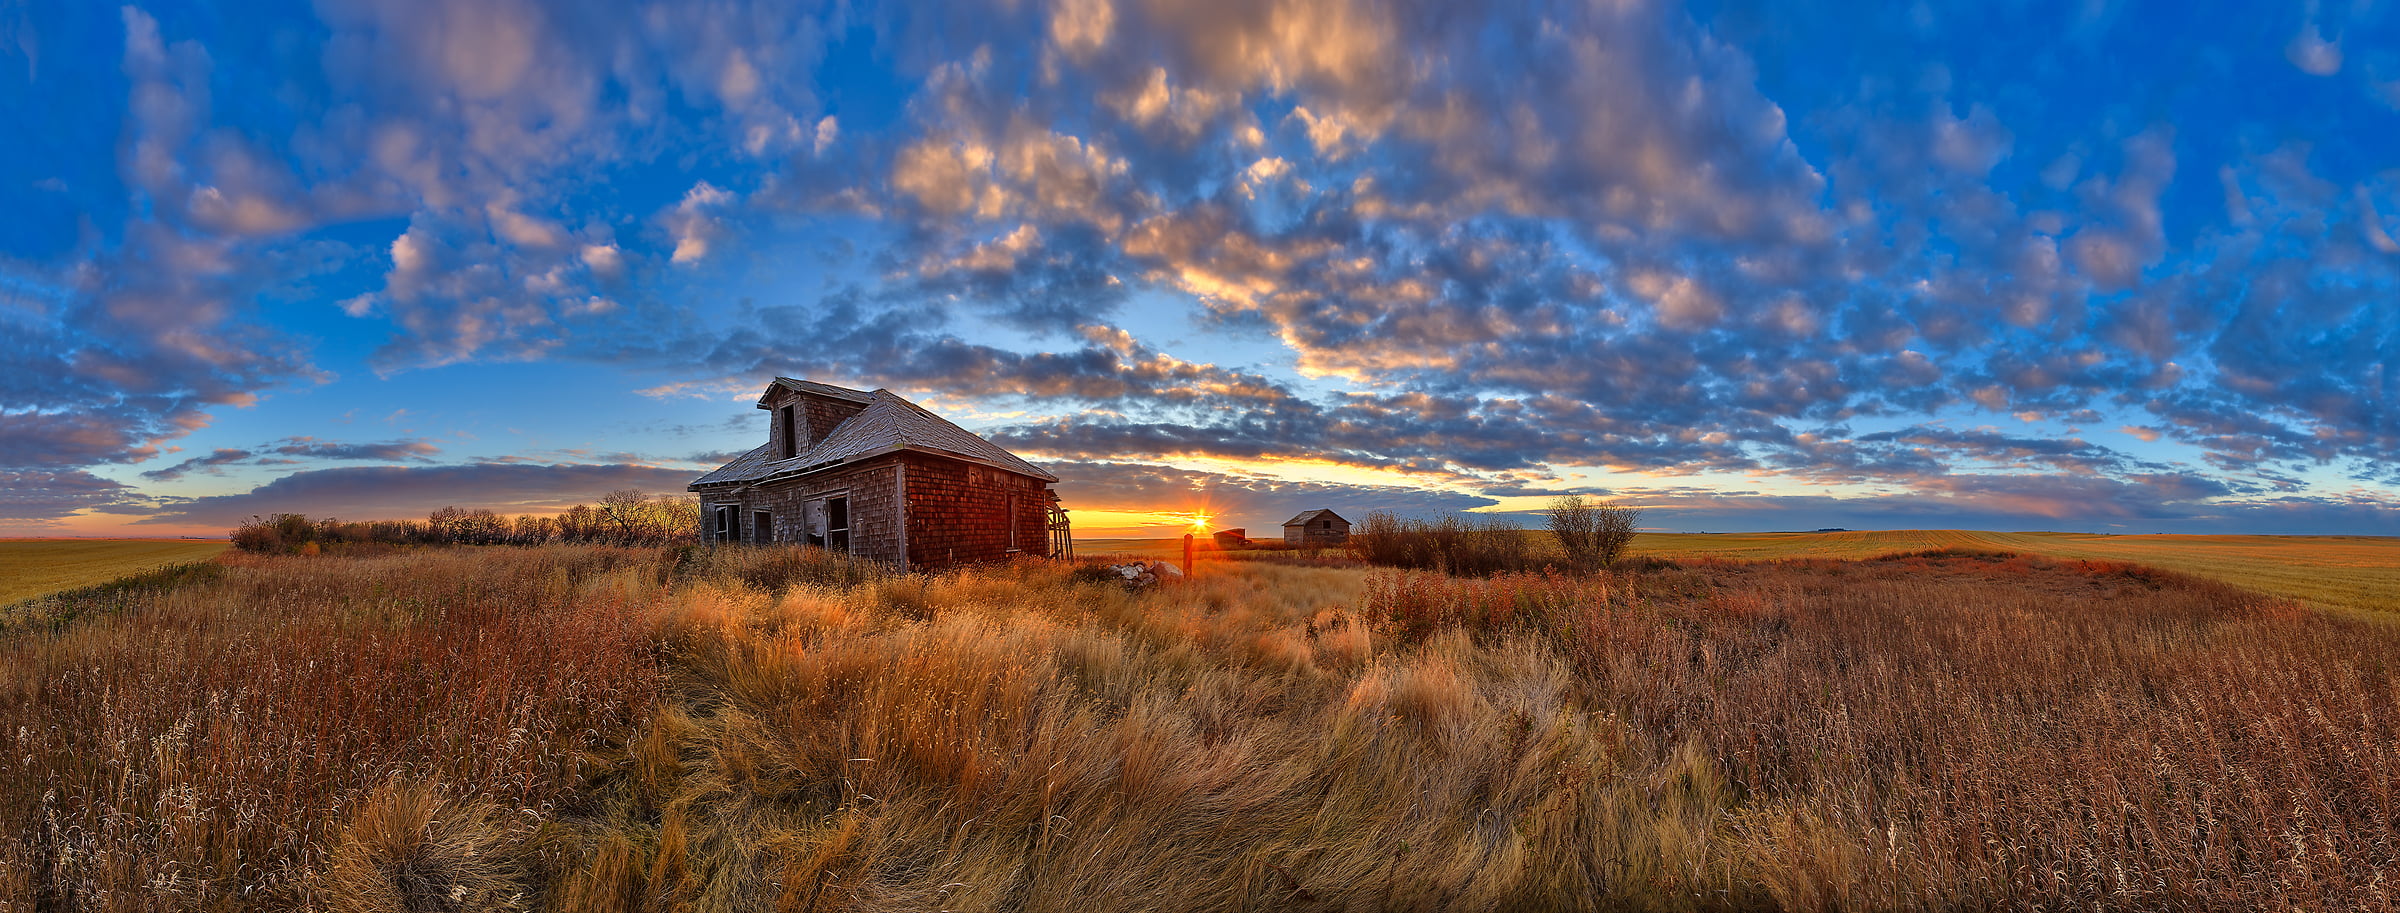 137 megapixels! A very high resolution, large-format VAST photo of farmland, grasslands, the prairie, and an old abandoned house; fine art landscape photo created at sunset by Scott Dimond on the Great Plains in Alberta, Canada.